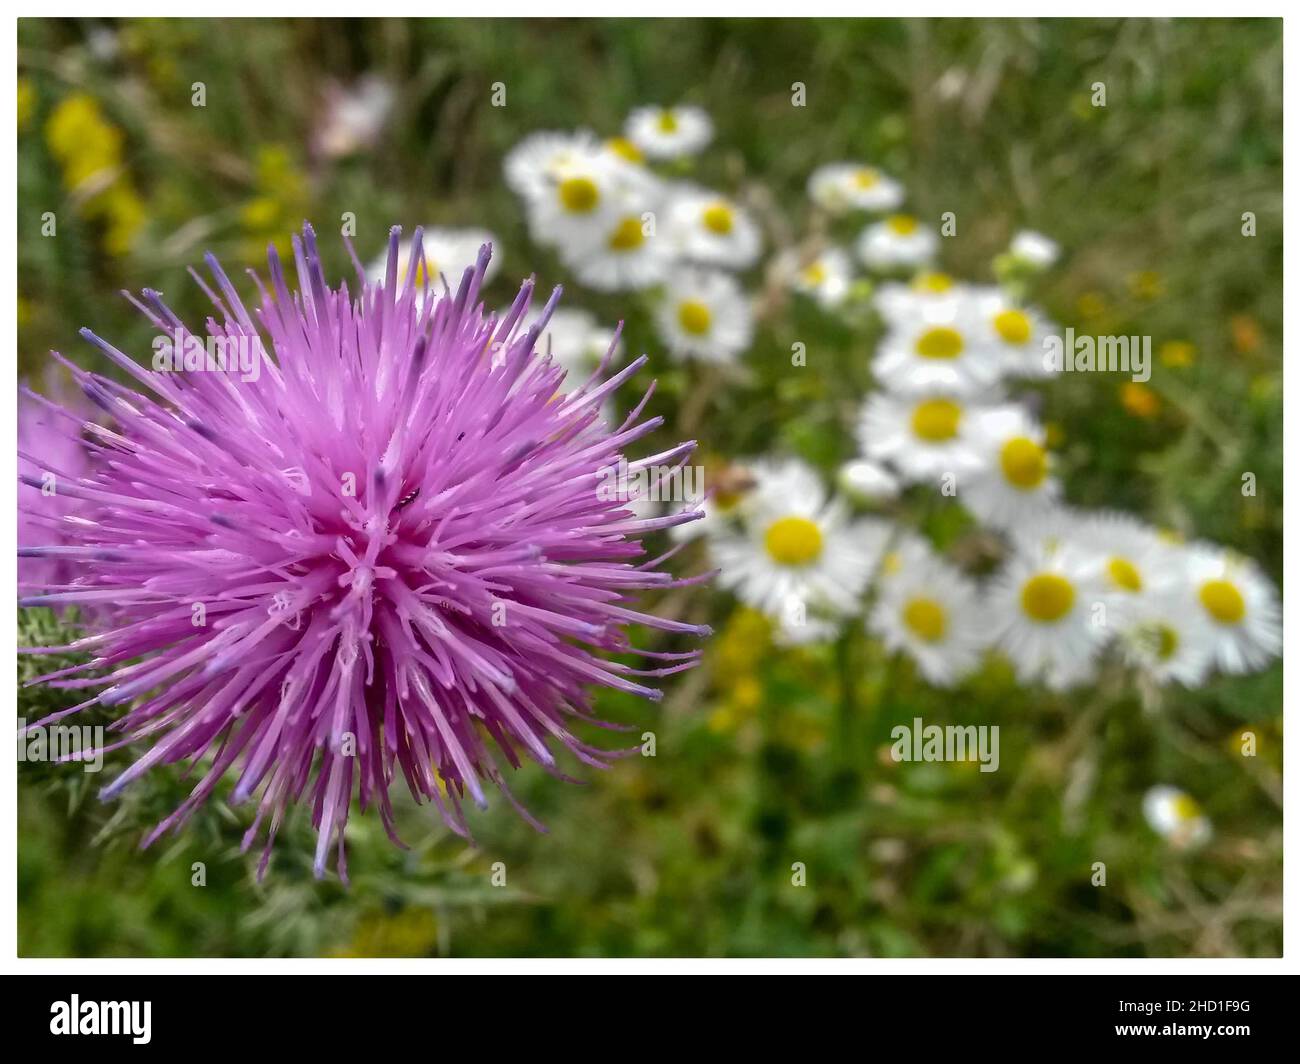 Selective focus shot of a purple thistle in a field Stock Photo